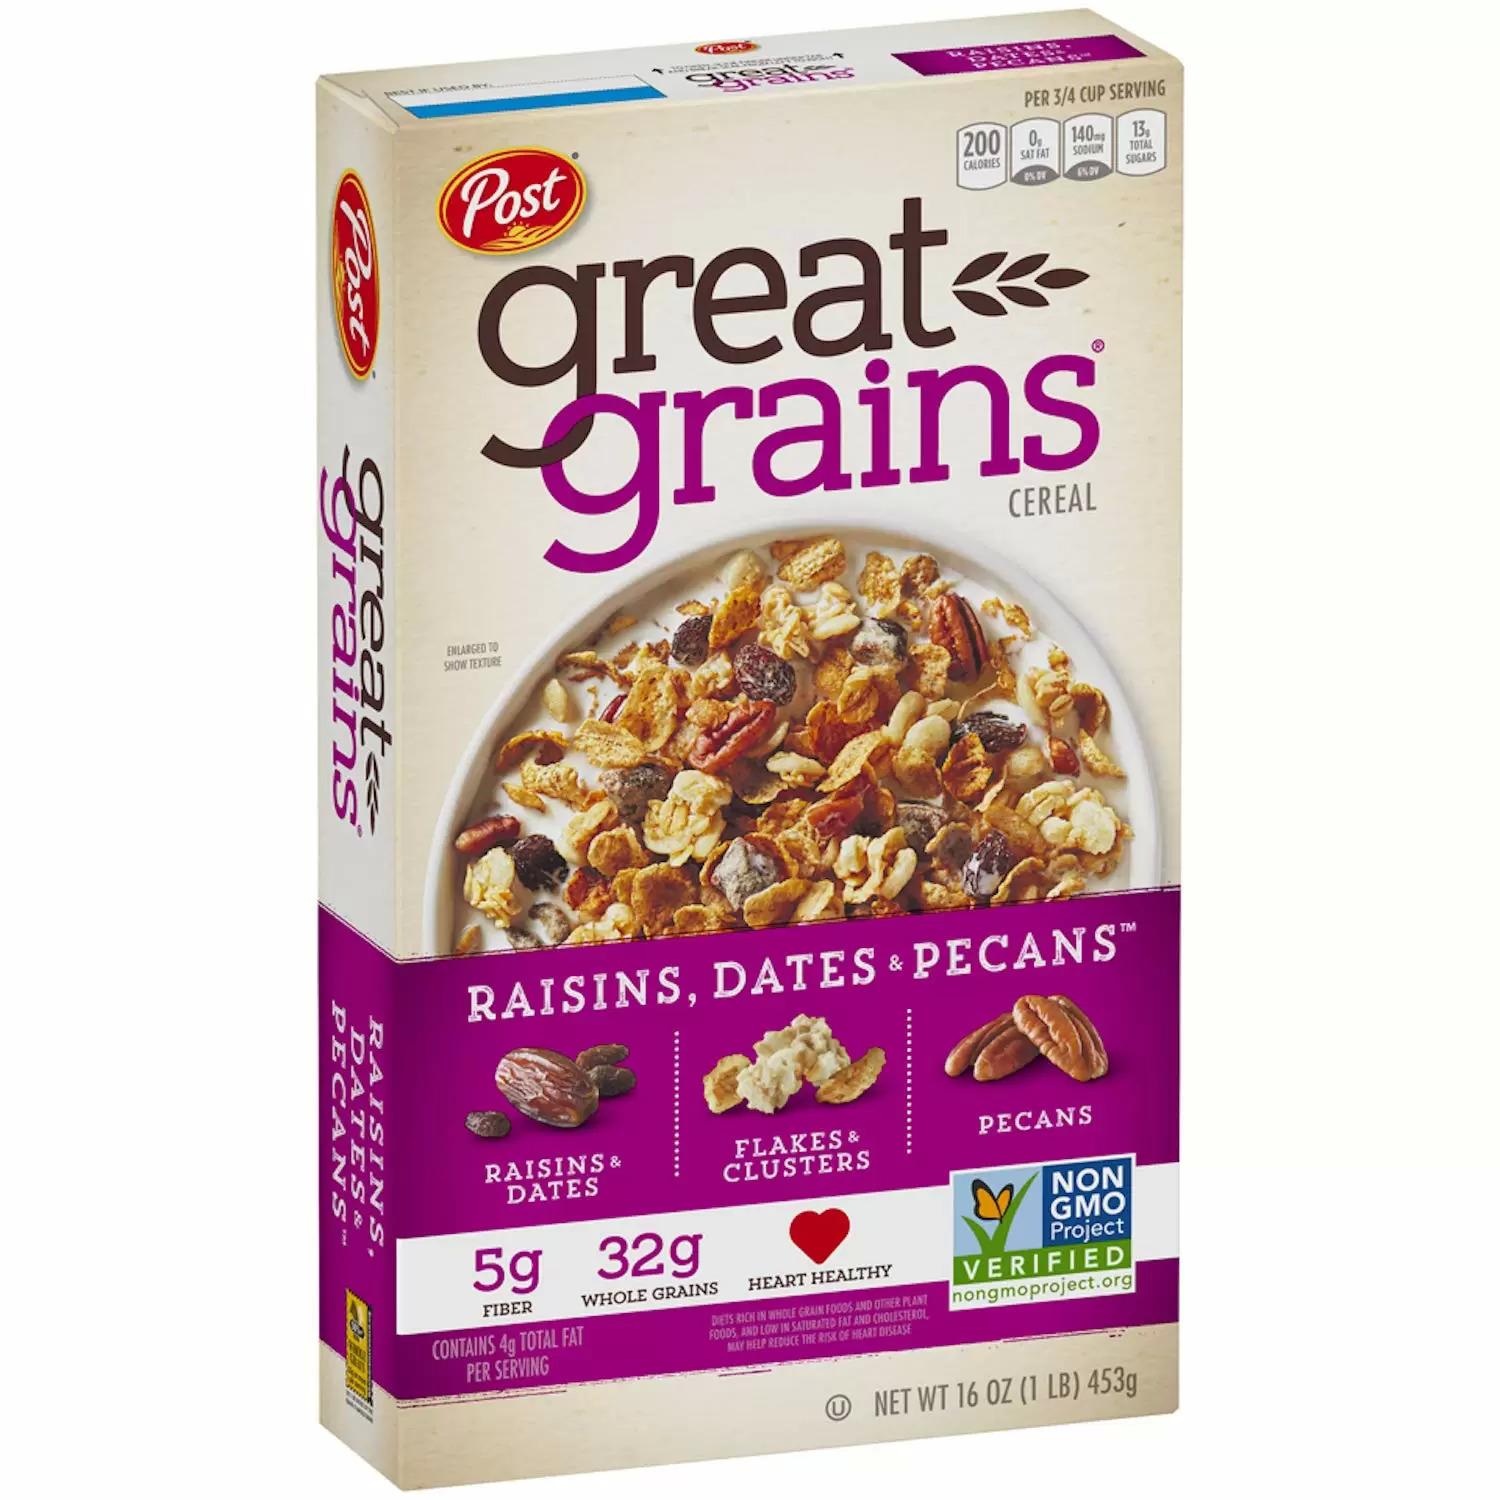 Post Great Grains Raisins Dates  and Pecans Whole Grain Cereal for $3.04 Shipped